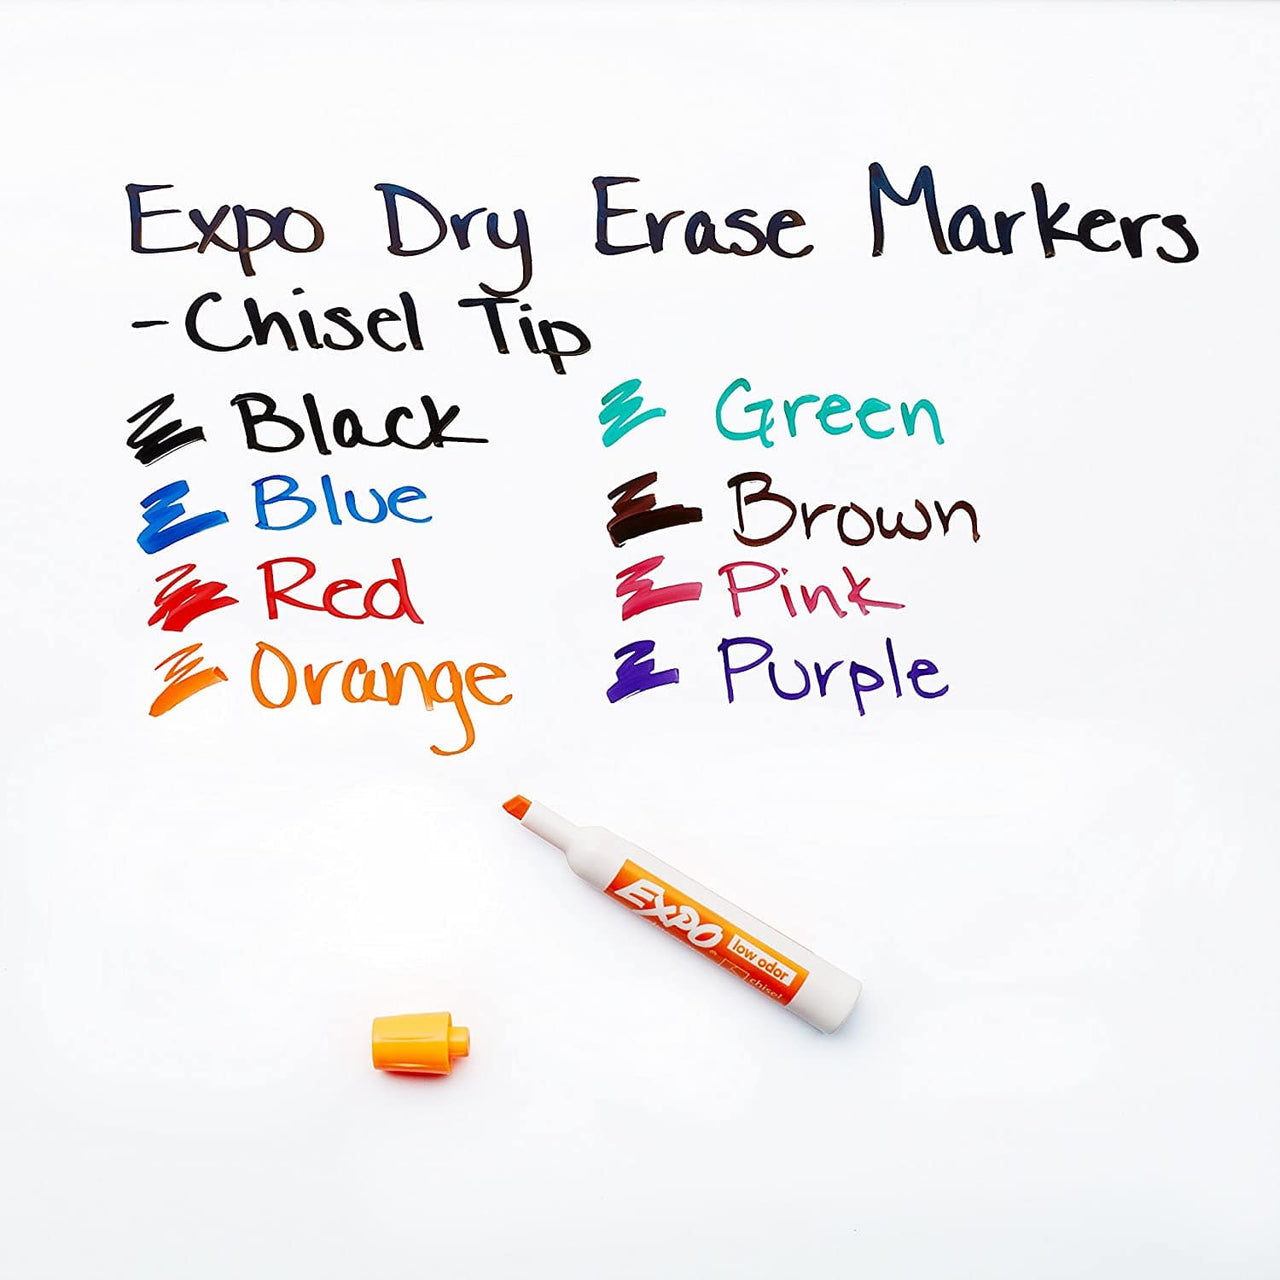 https://cdn.shopify.com/s/files/1/0841/7355/products/think-board-expo-colored-dry-erase-markers-accessories-15863654514801.jpg?v=1677771470&width=1280